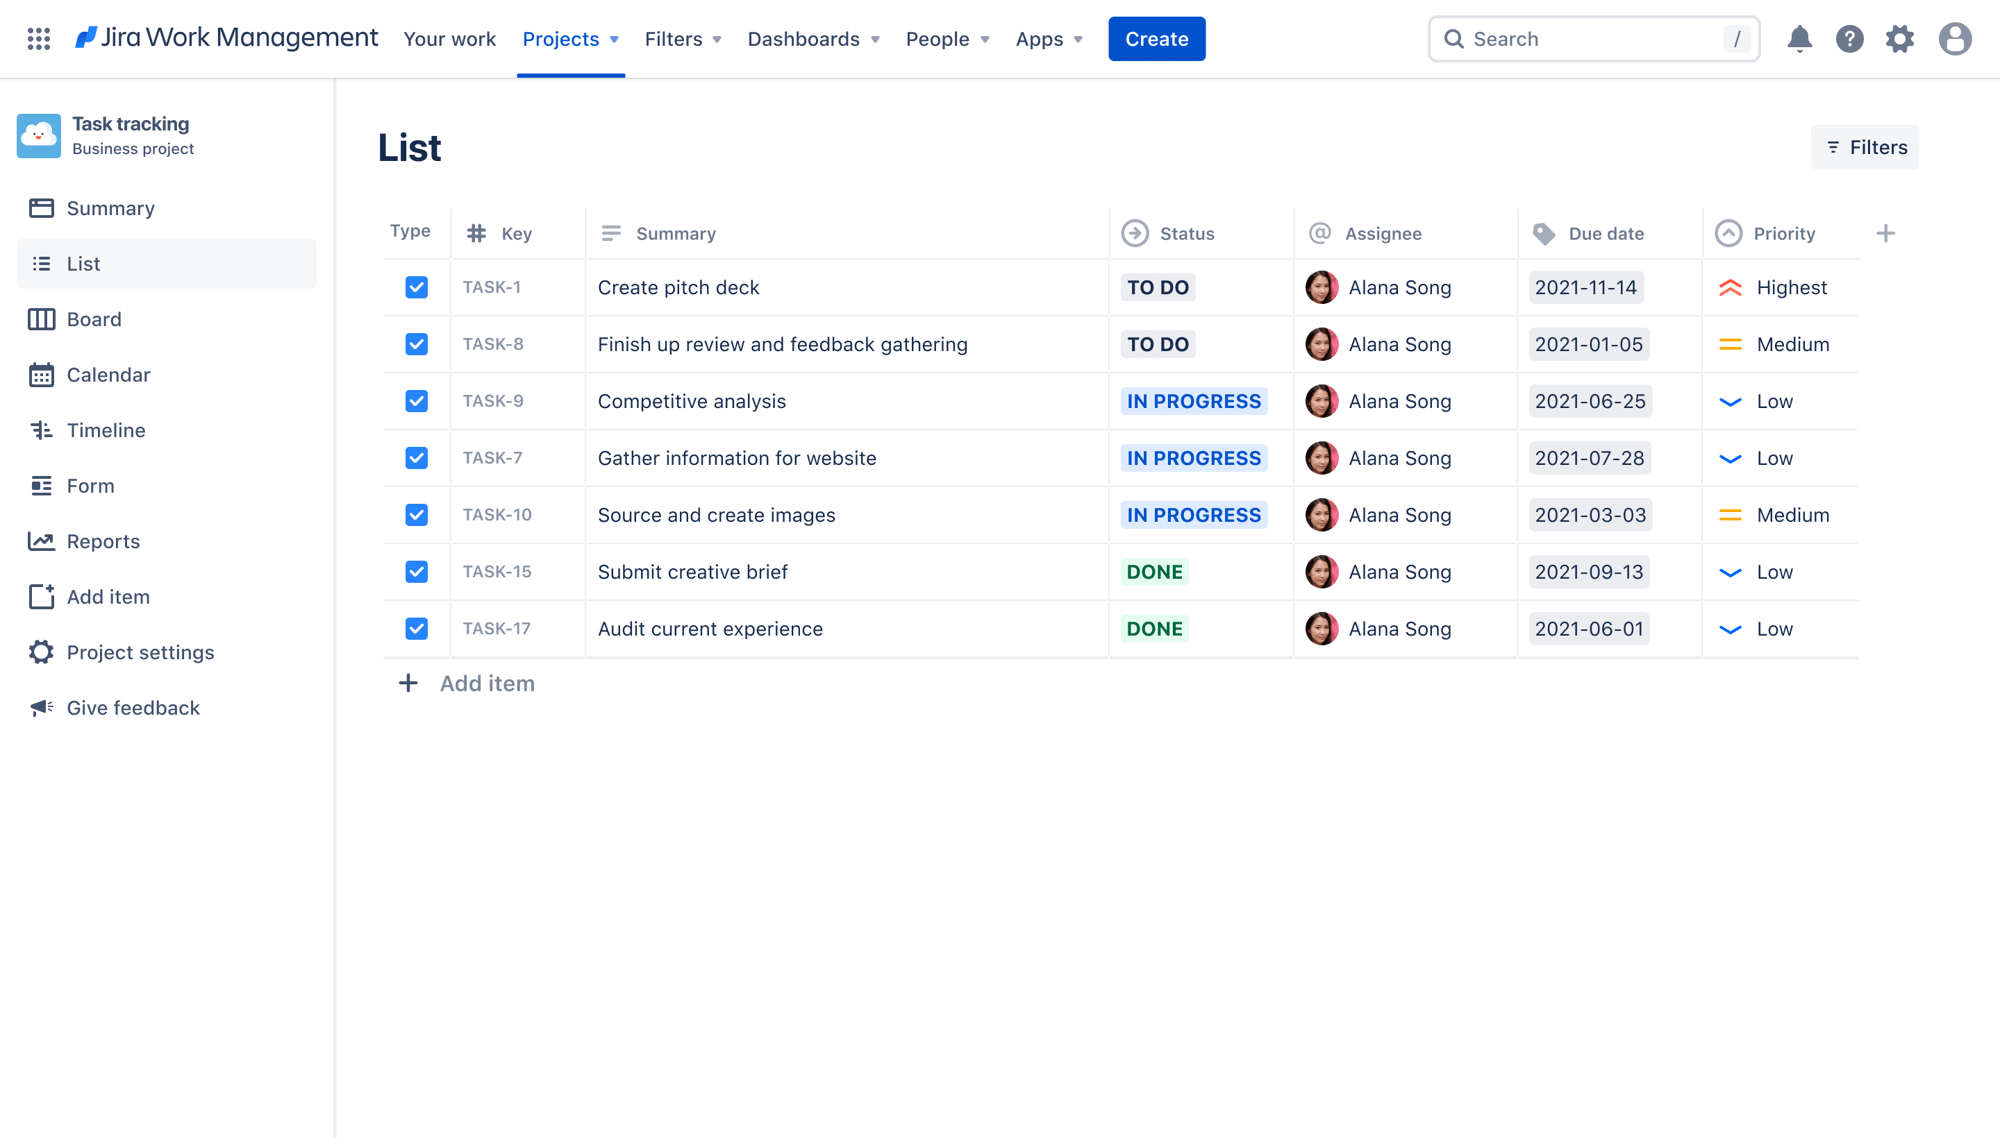 Task tracking - List view@2x